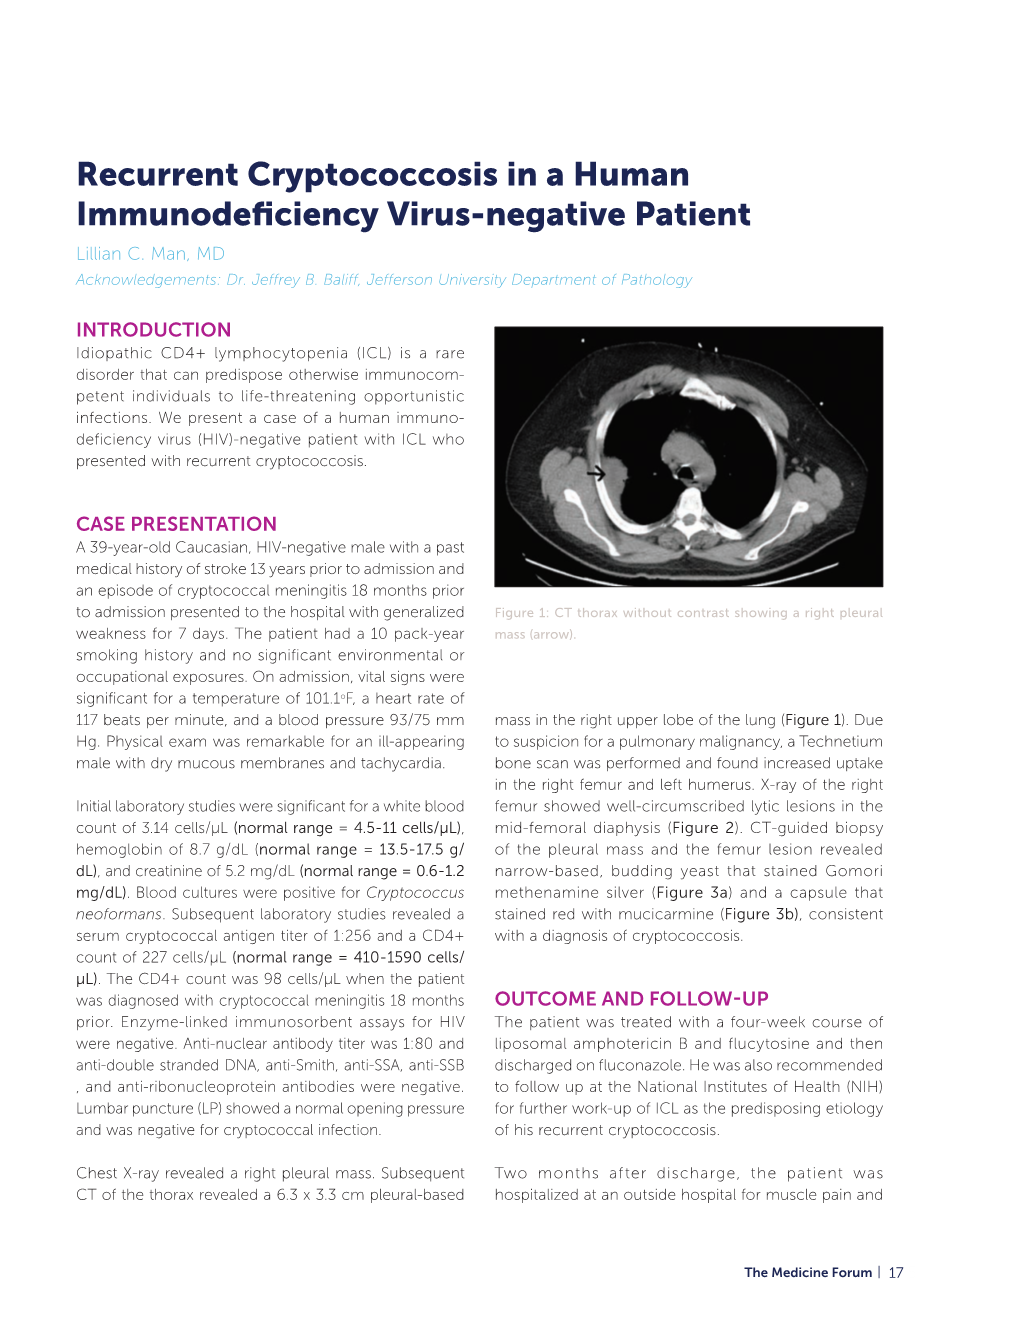 Recurrent Cryptococcosis in a Human Immunodeficiency Virus-Negative Patient Lillian C